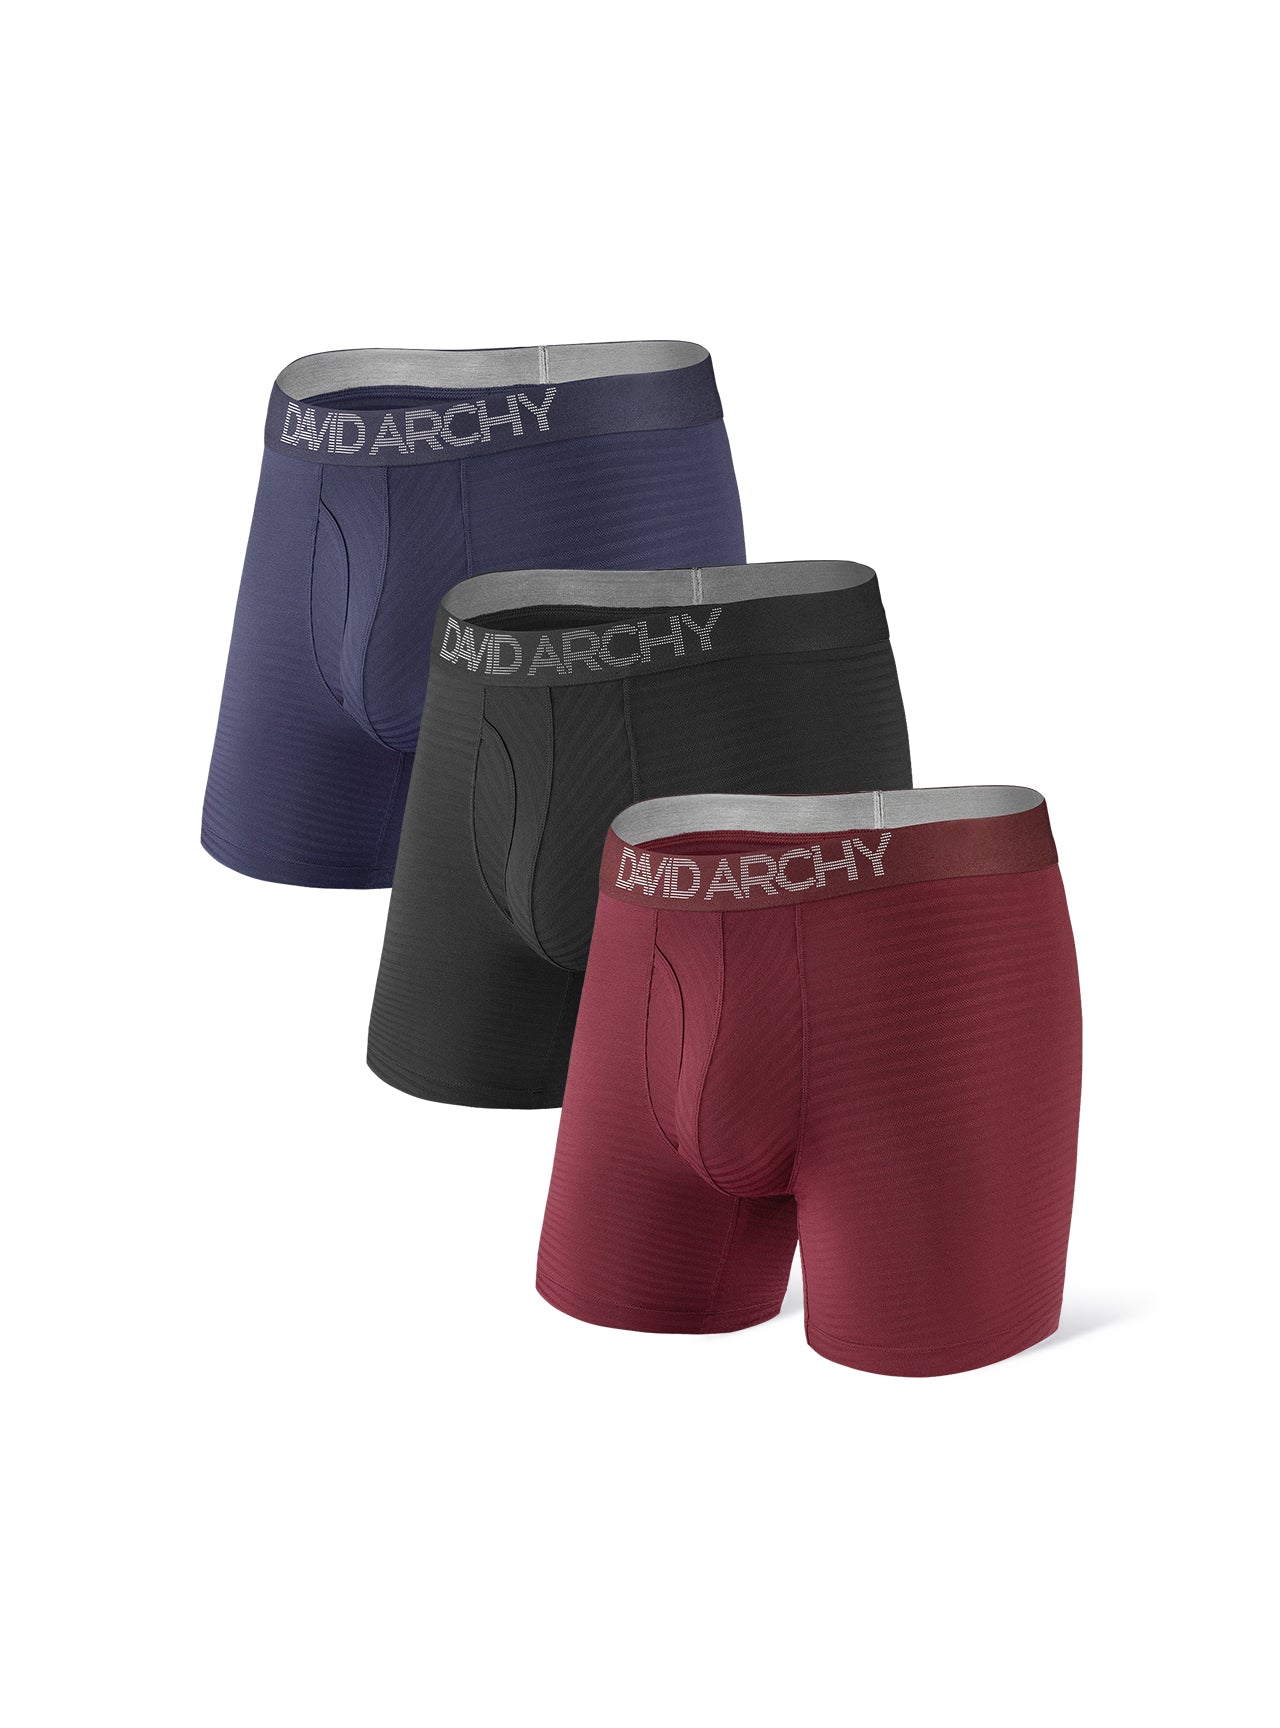 3 Packs Ultra Modal Boxer Briefs with Fly